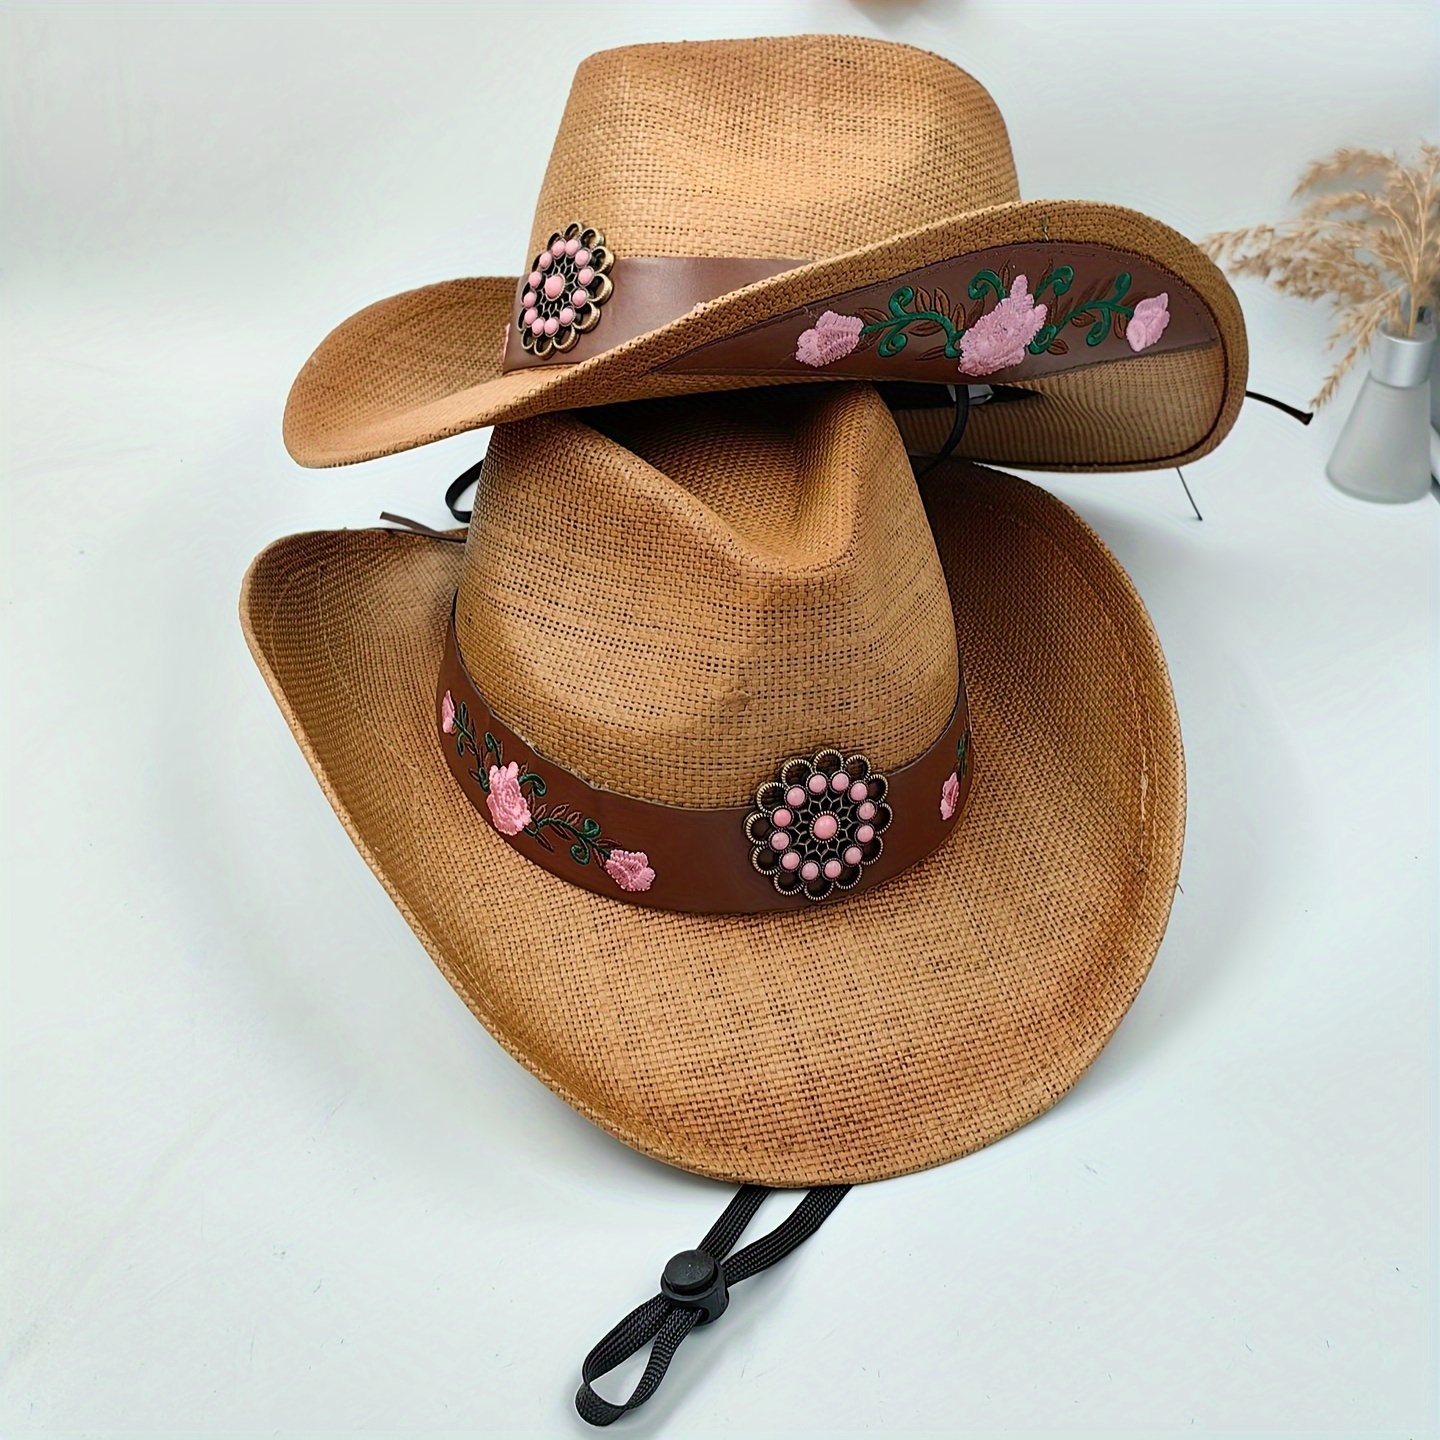 Retro Western Cowboy Style Sun Hat, Bucket Hats with Large Brim for Sunshade, Sunscreen, and UV Protection. Includes Windproof Rope for Outdoor